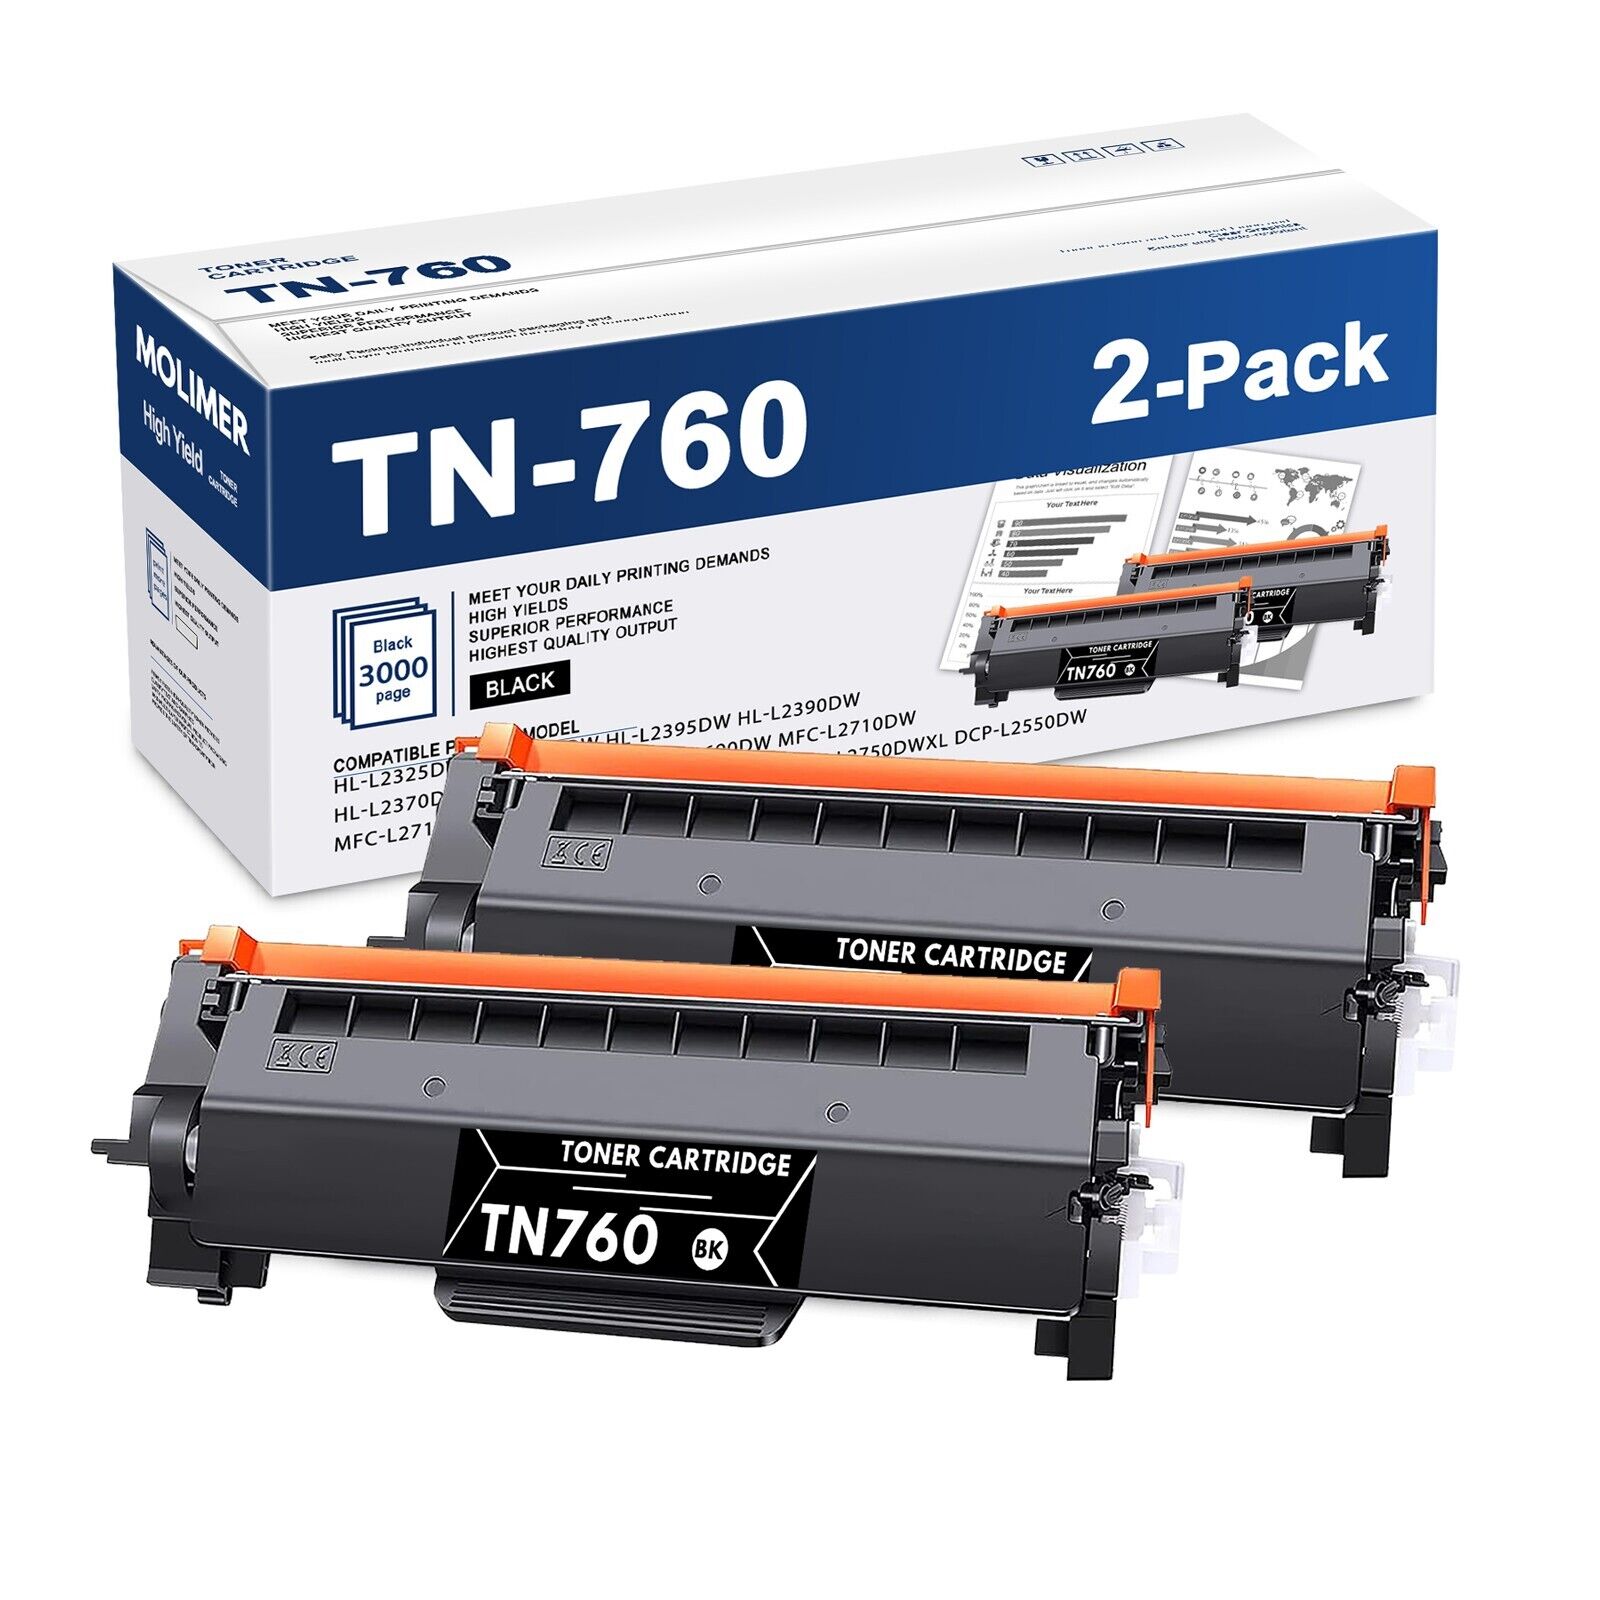 TN760 High Yield Toner Cartridge Compatible for Brother DCP-L2550DW Printer 2BK